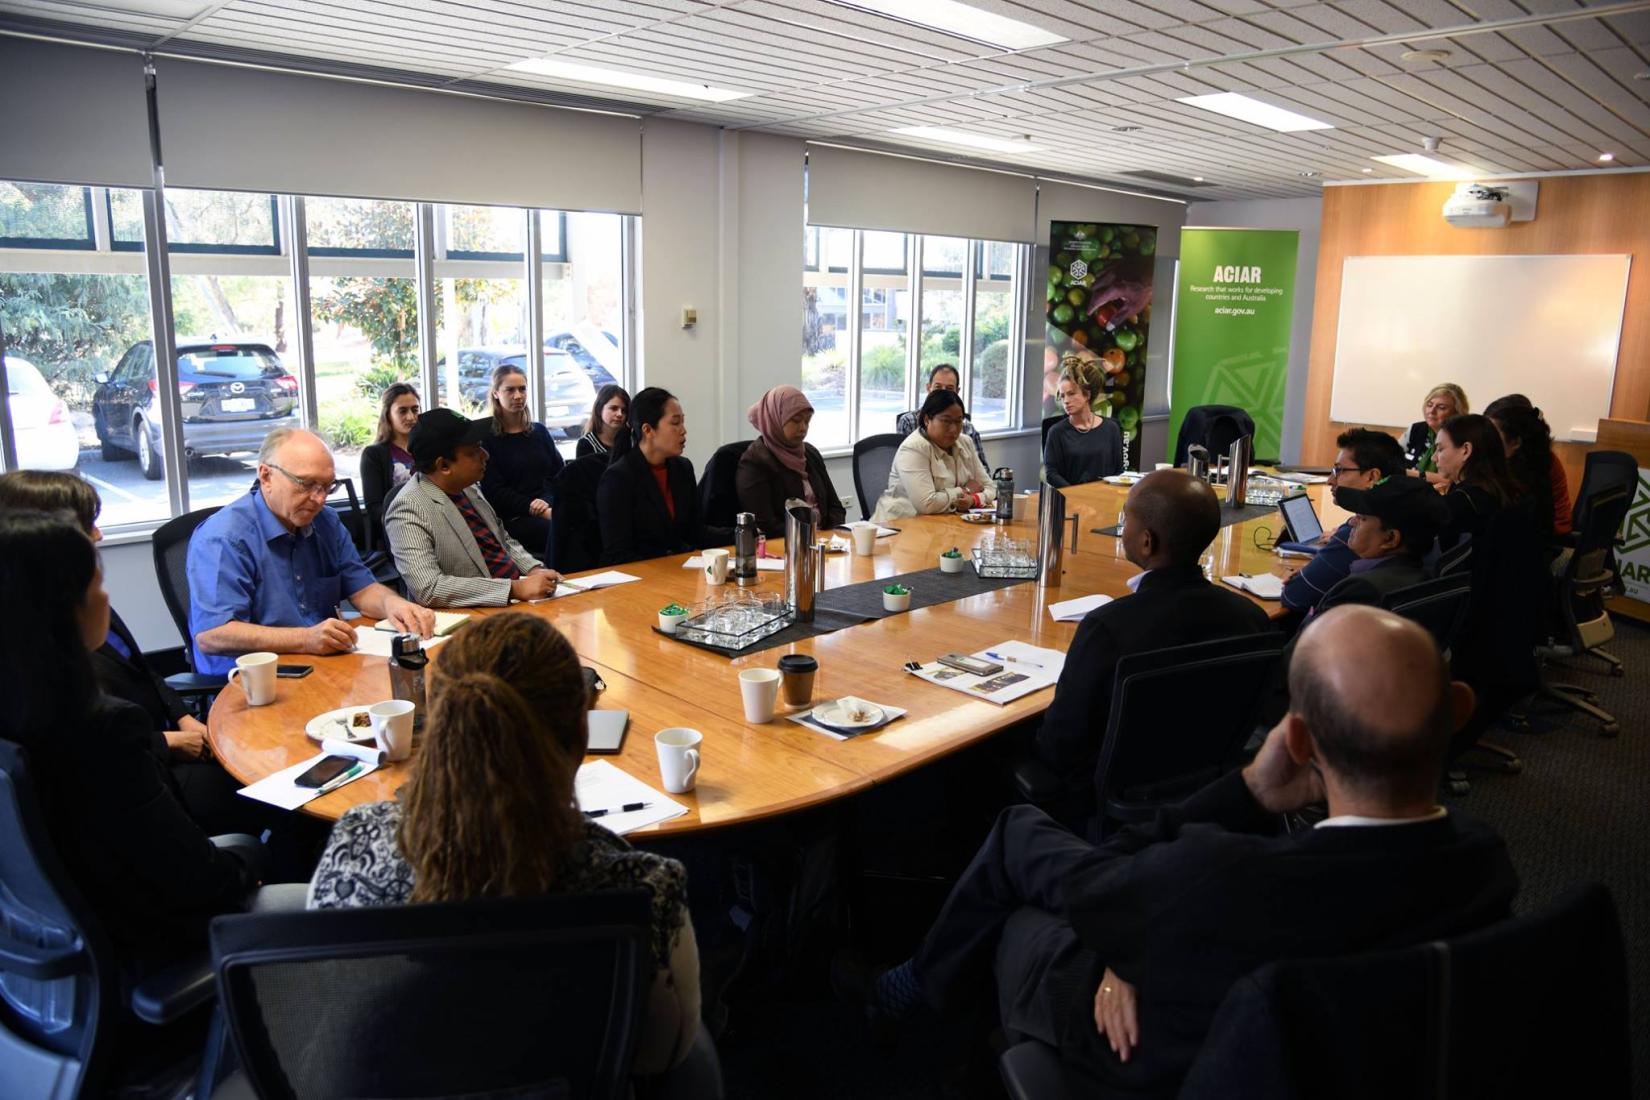 The John Dillon Fellows meeting at ACIAR House in Canberra as part of their four-week visit to Australia.